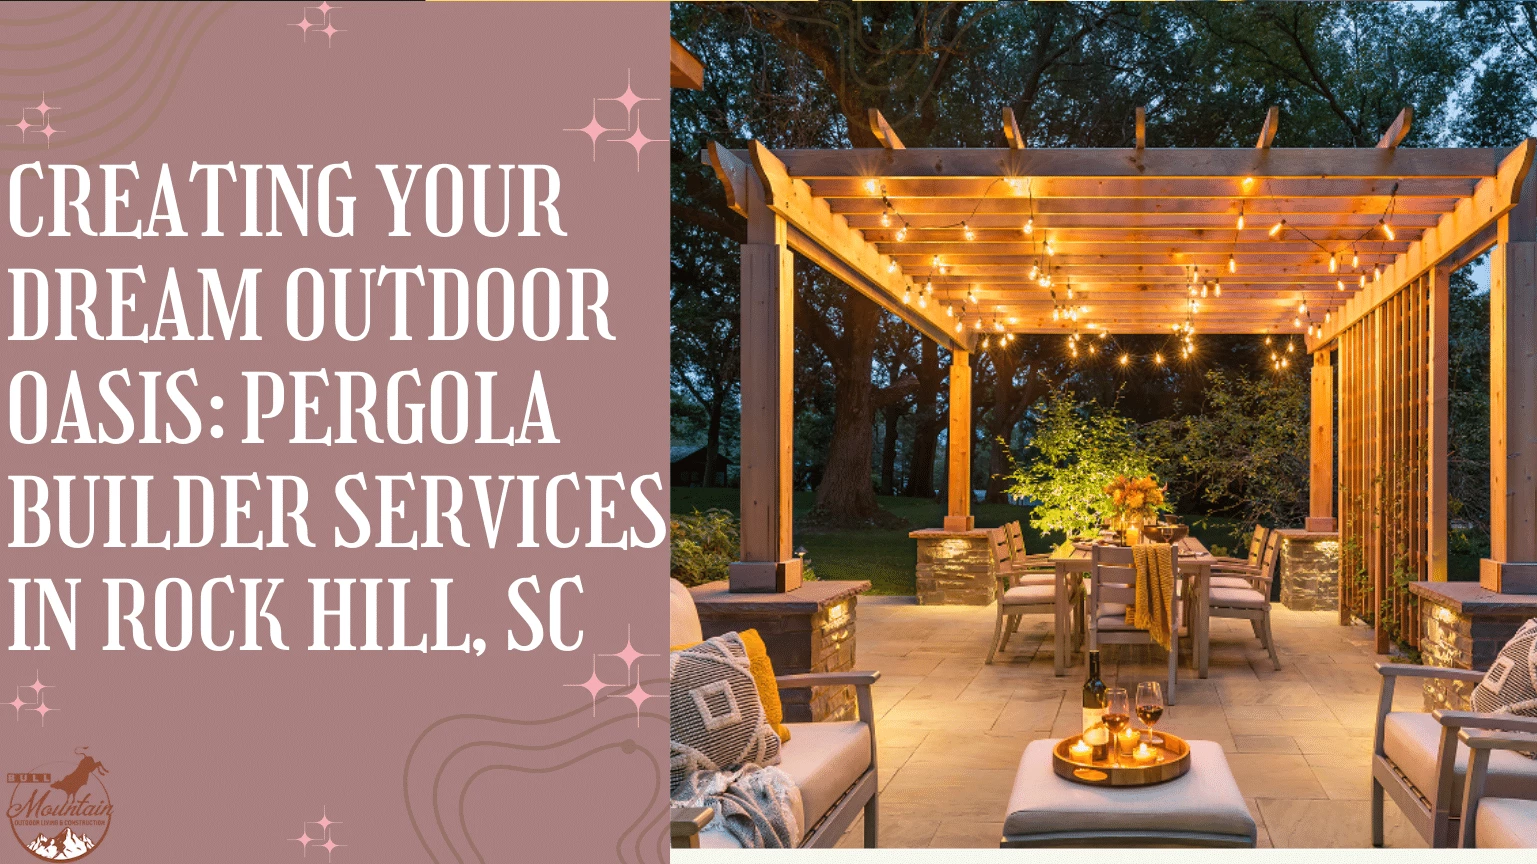 Creating Your Dream Outdoor Oasis Pergola Builder Services in Rock Hill, SC